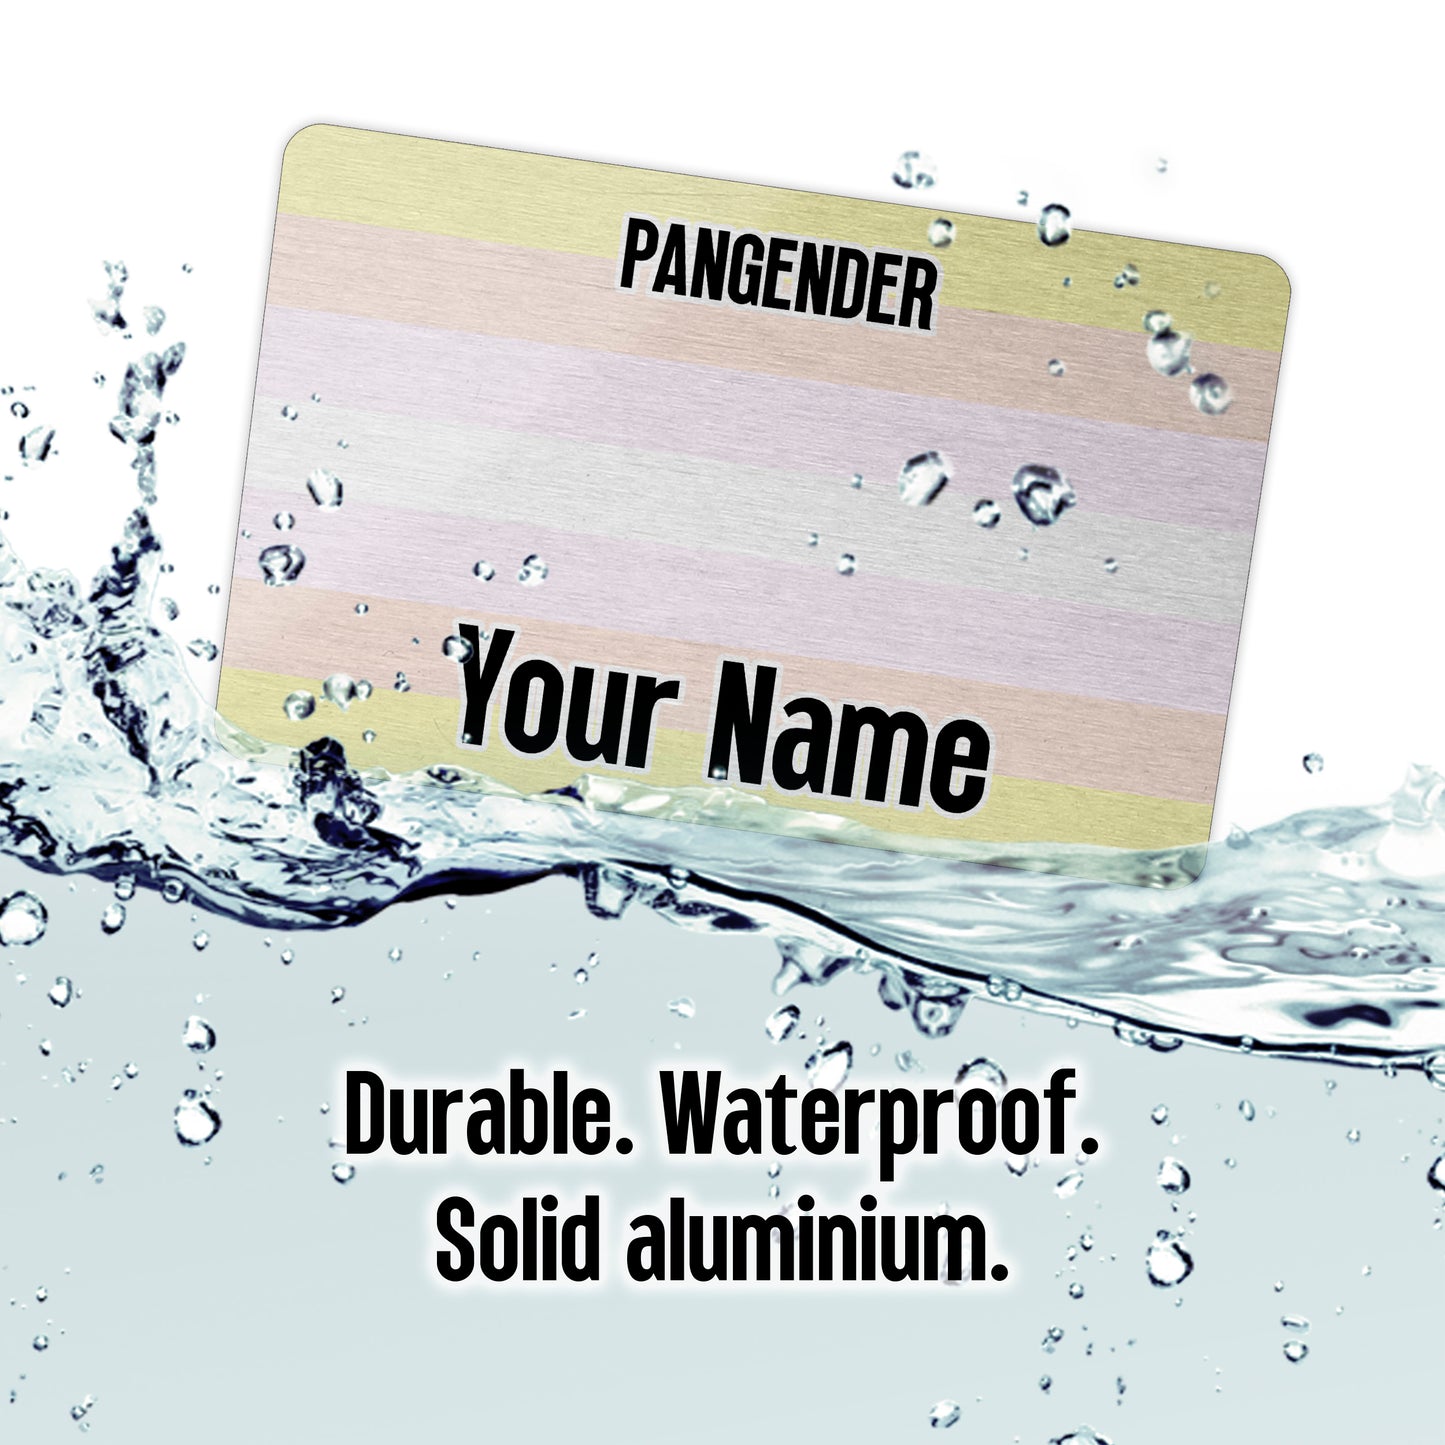 Aluminium wallet card personalised with your name and the pangender pride flag